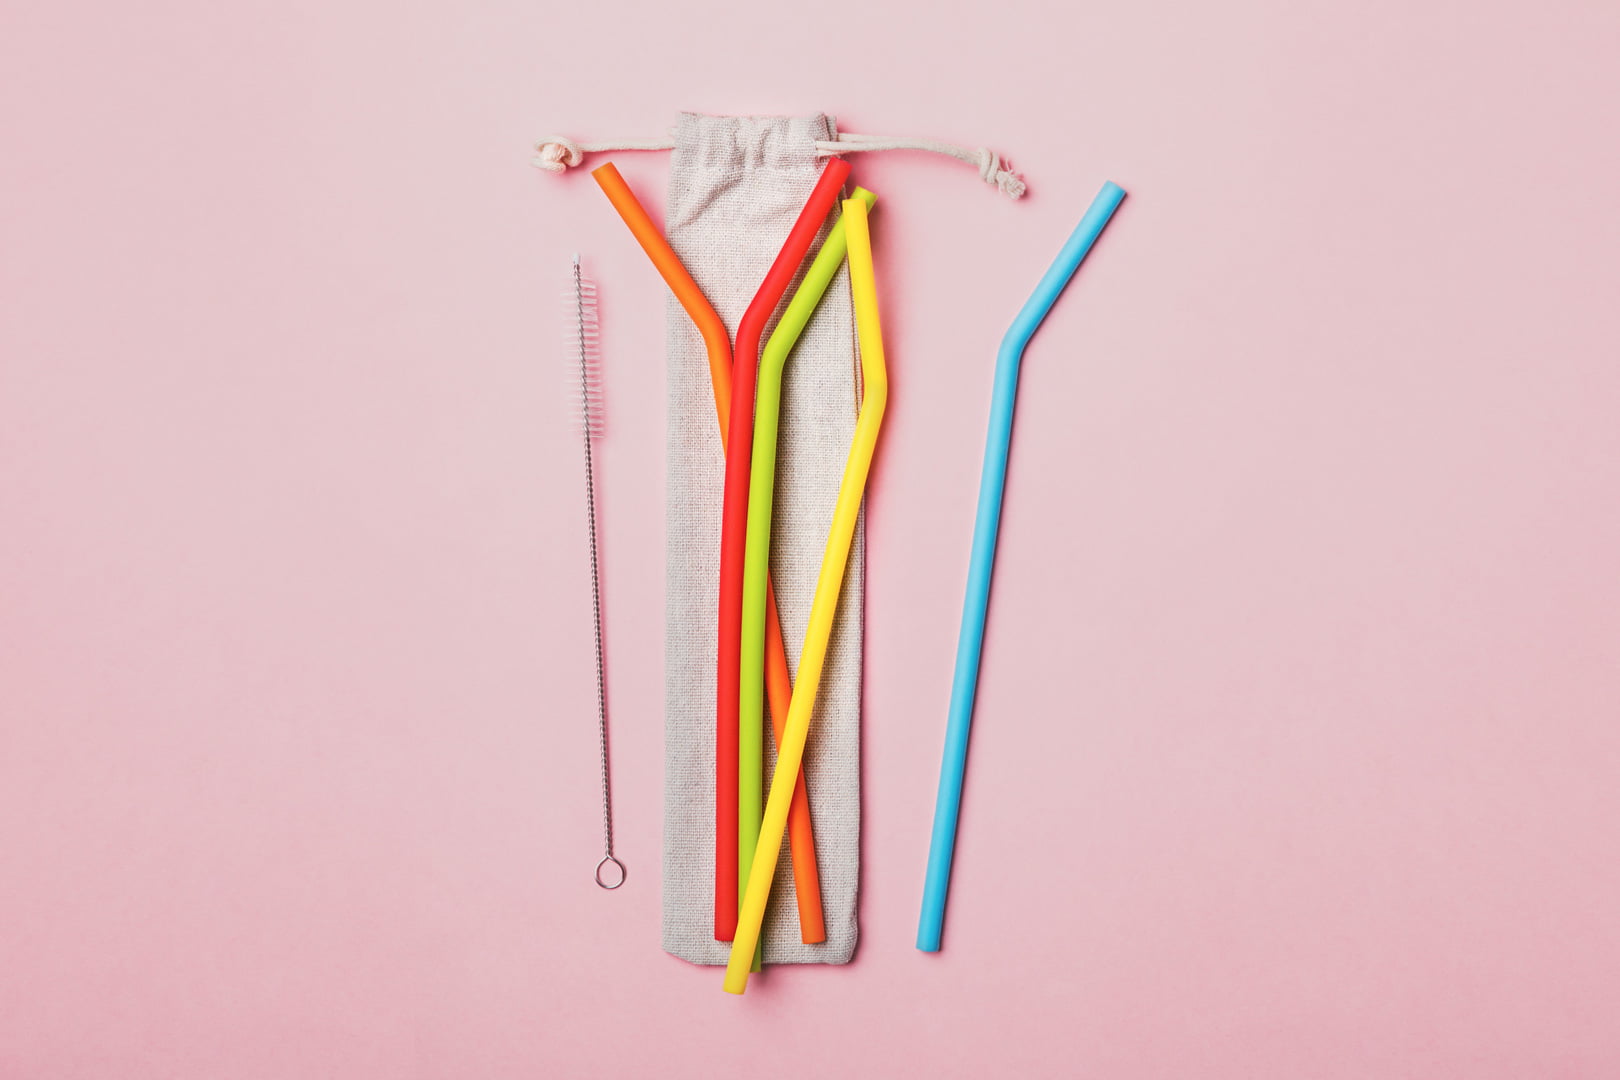 Silicone straws and their benefits